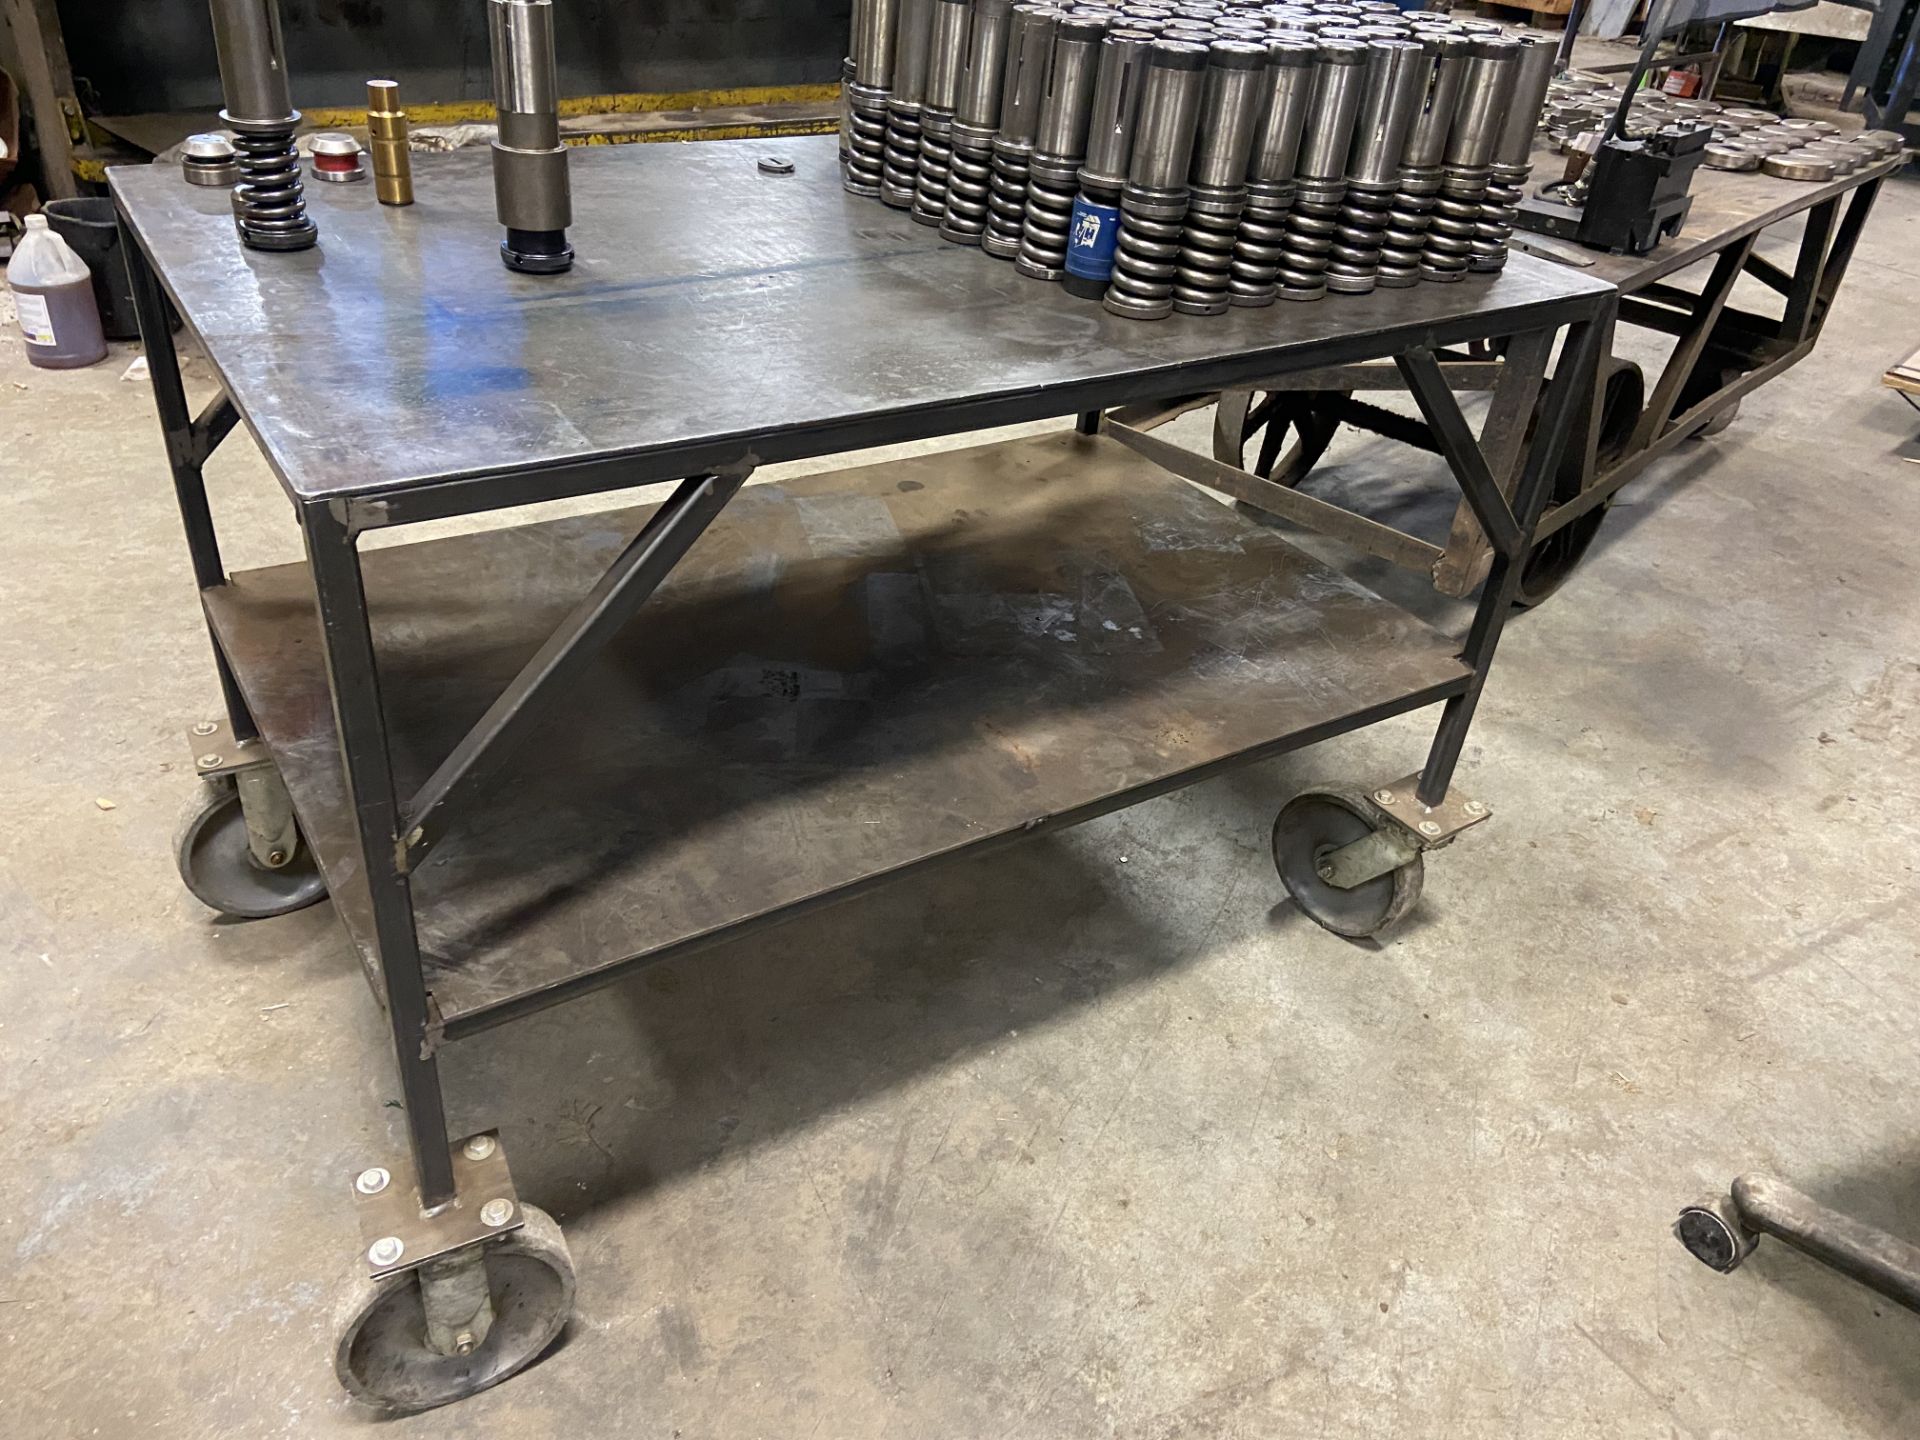 Portable Shop Cart, with Bottom Shelf, Overall Dims.: Aprox. 48” L x 30” W x 34” H, Mounted on - Image 3 of 3